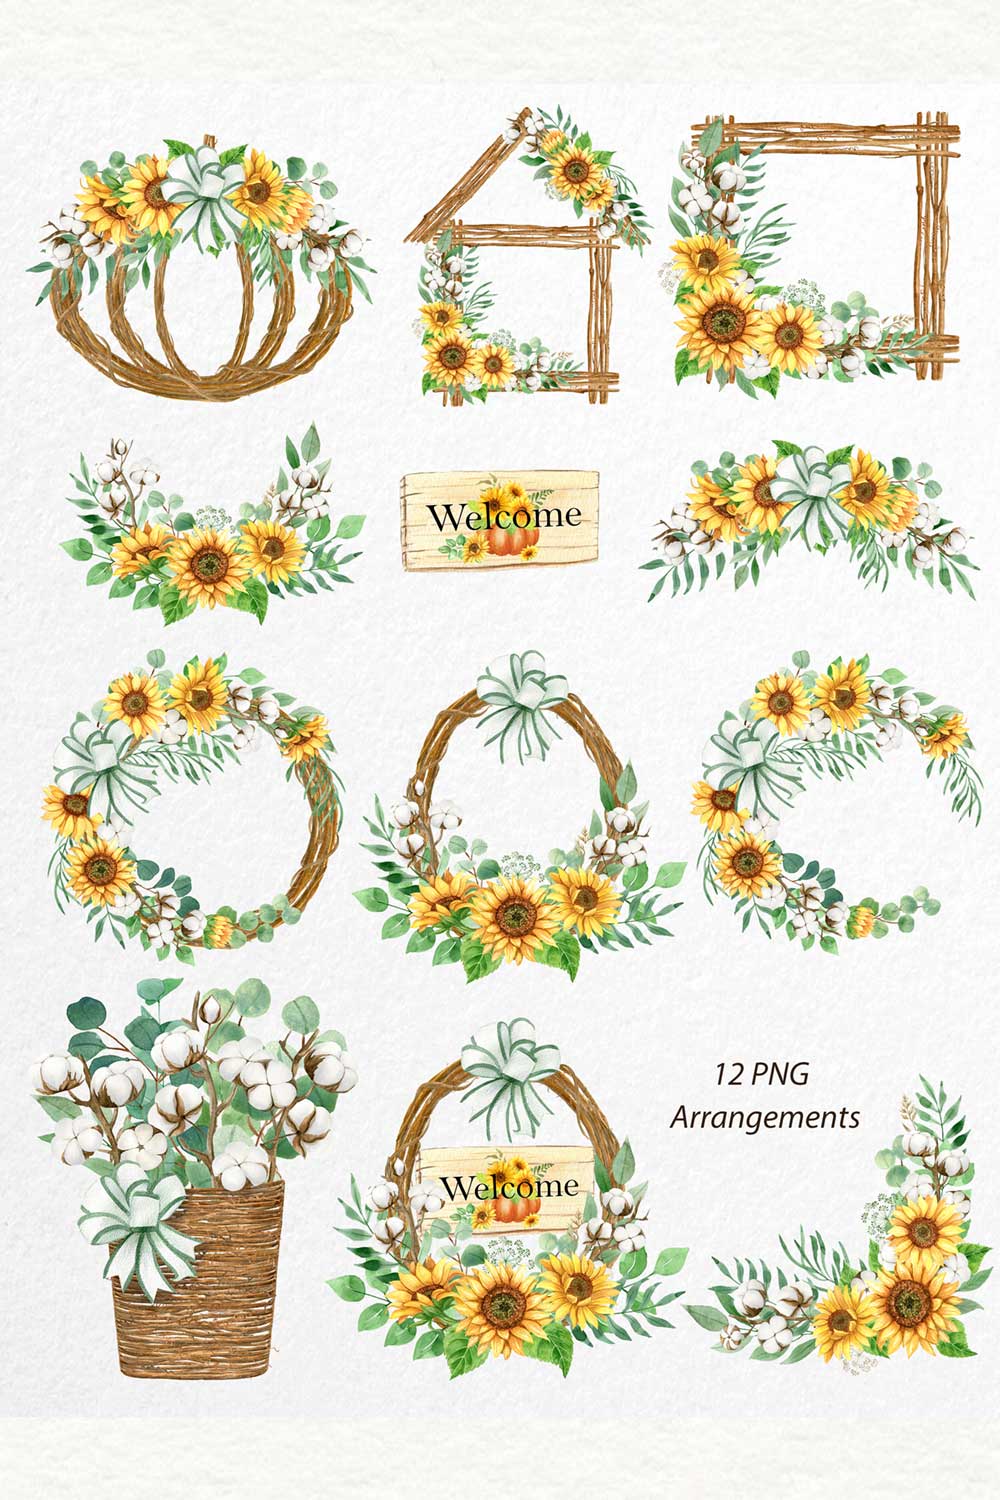 Watercolor Sunflower and Cotton Clipart pinterest image.